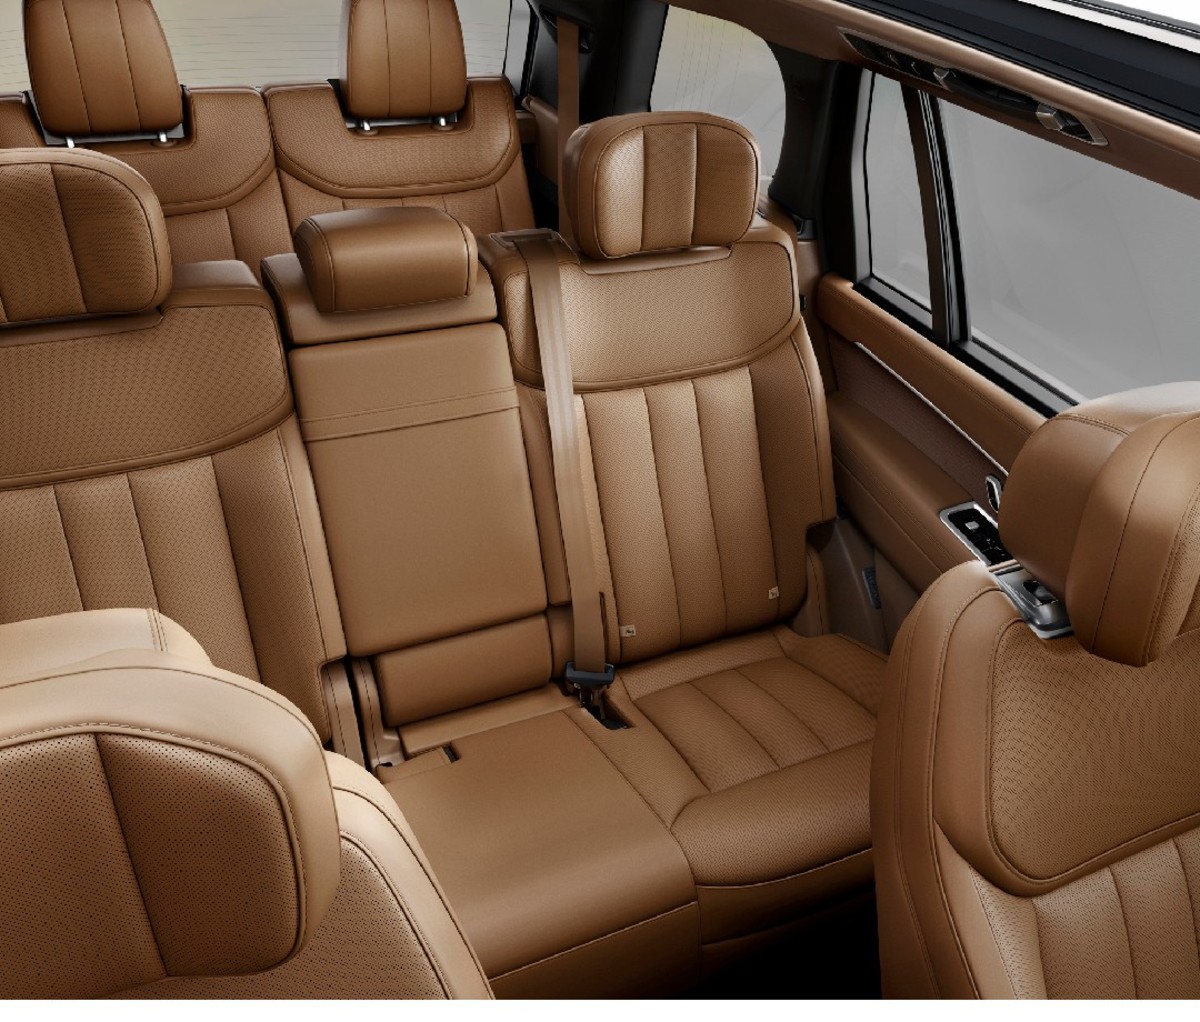 2022 Range Rover brown interior full shot with three rows